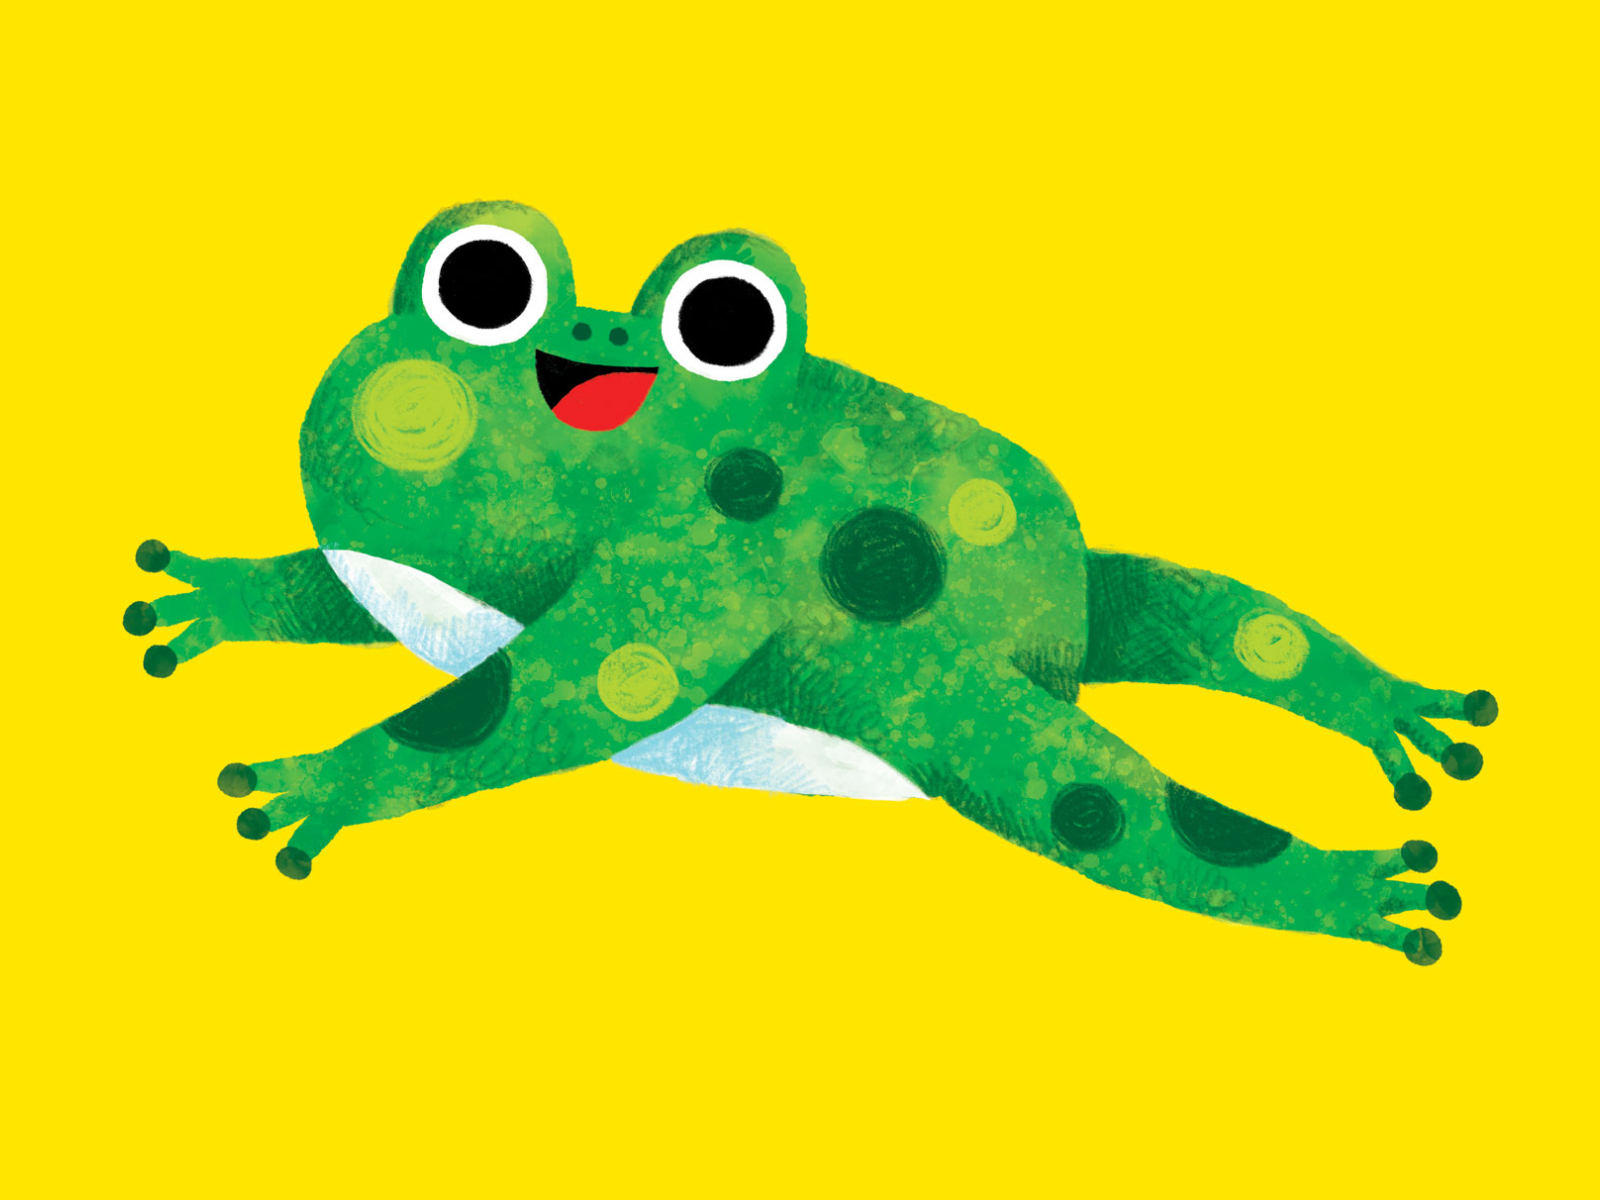 Jumping Frog Illustration by Lizzy Dee Studio on Dribbble